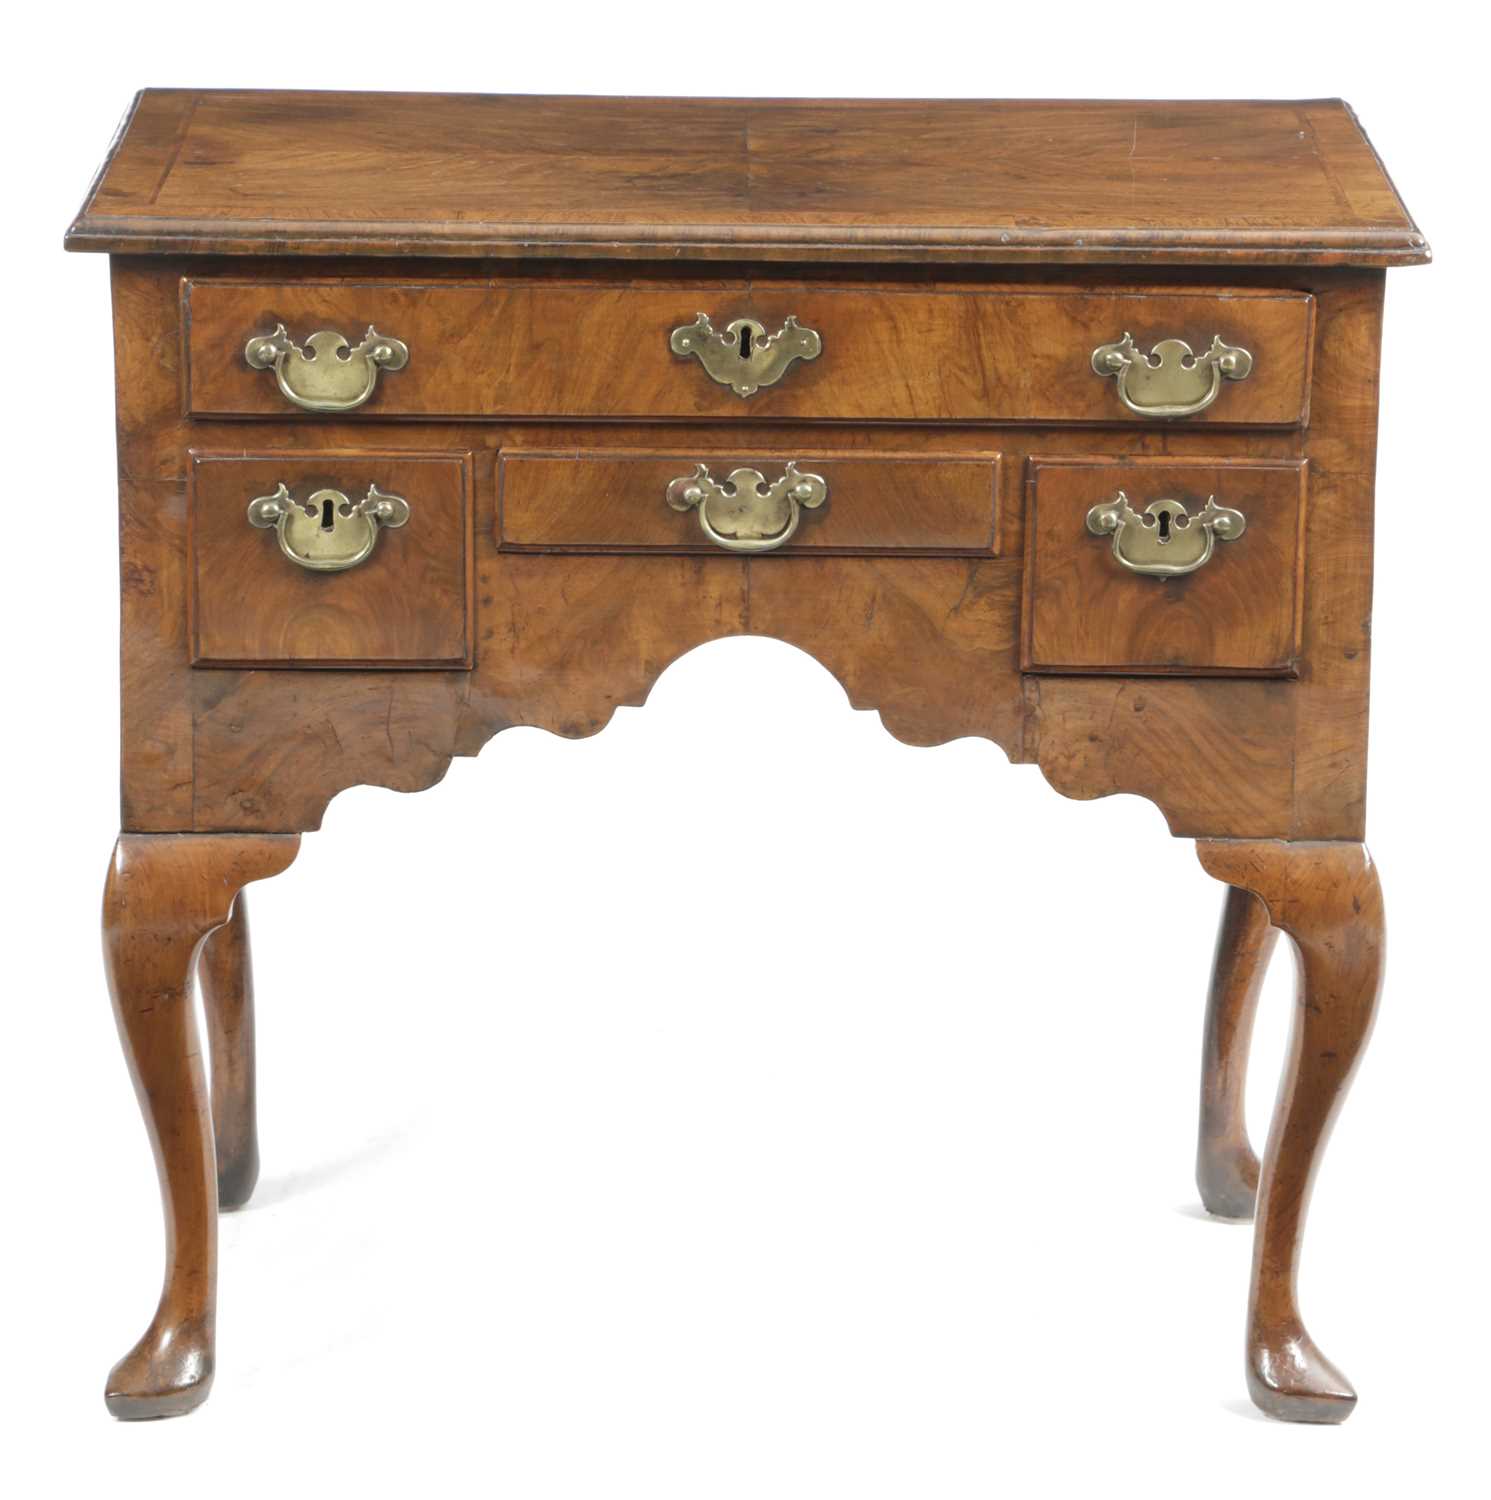 A QUEEN ANNE WALNUT LOWBOY C.1710 cross and feather banded, the quarter veneered top above one